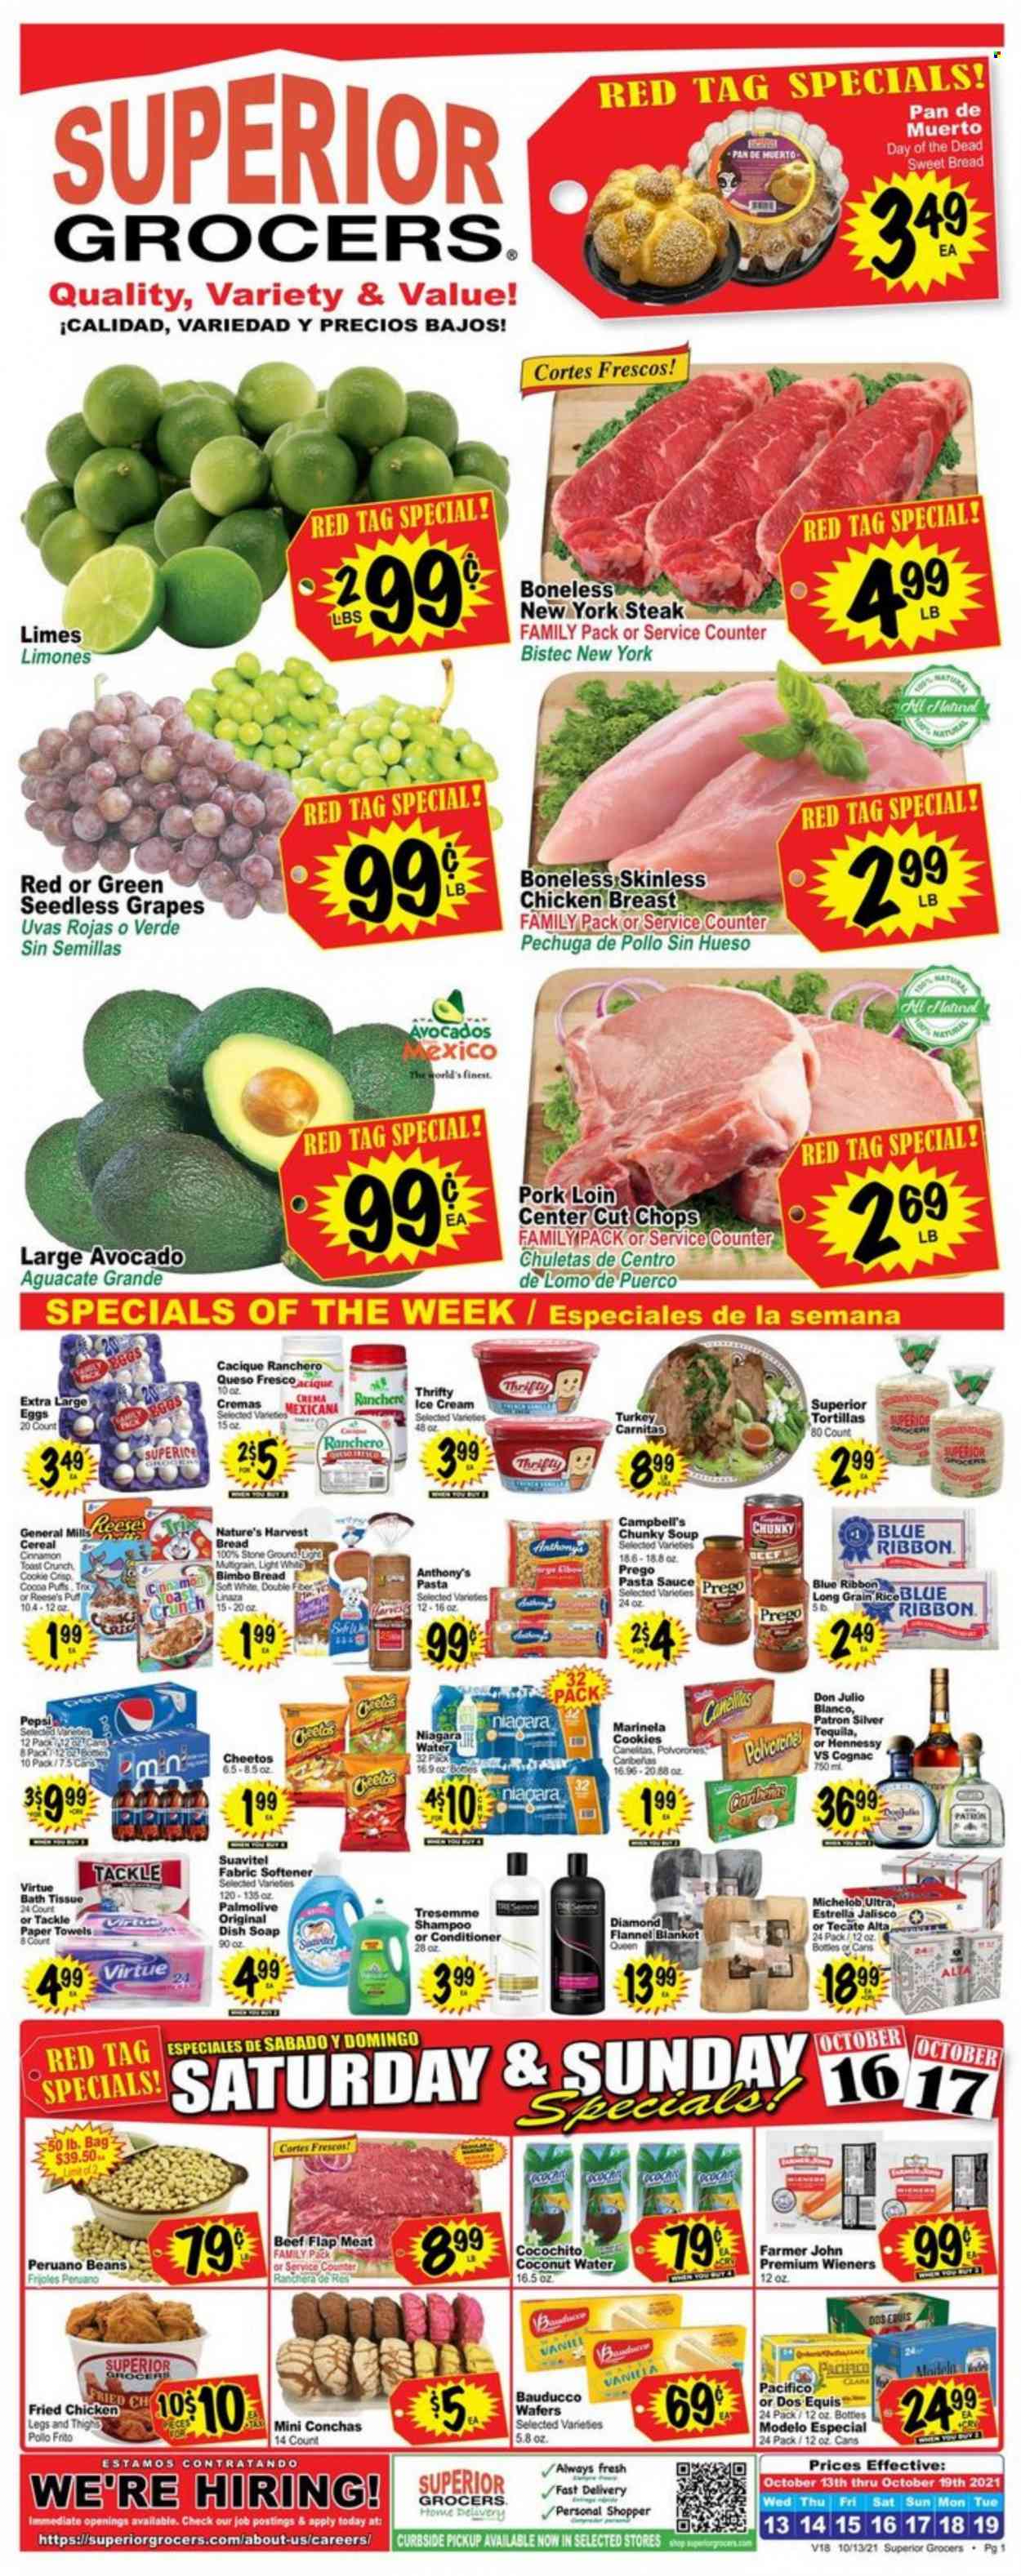 thumbnail - Superior Grocers Flyer - 10/13/2021 - 10/19/2021 - Sales products - seedless grapes, bread, tortillas, Blue Ribbon, puffs, sweet bread, beans, grapes, limes, chicken breasts, steak, pork loin, pork meat, Campbell's, pasta sauce, soup, sauce, fried chicken, large eggs, ice cream, Reese's, cookies, wafers, Cheetos, cereals, cinnamon, Pepsi, coconut water, cognac, tequila, Hennessy, beer, Modelo, fabric softener, Palmolive, conditioner, TRESemmé, pan, bread pan, Dos Equis, Michelob. Page 1.